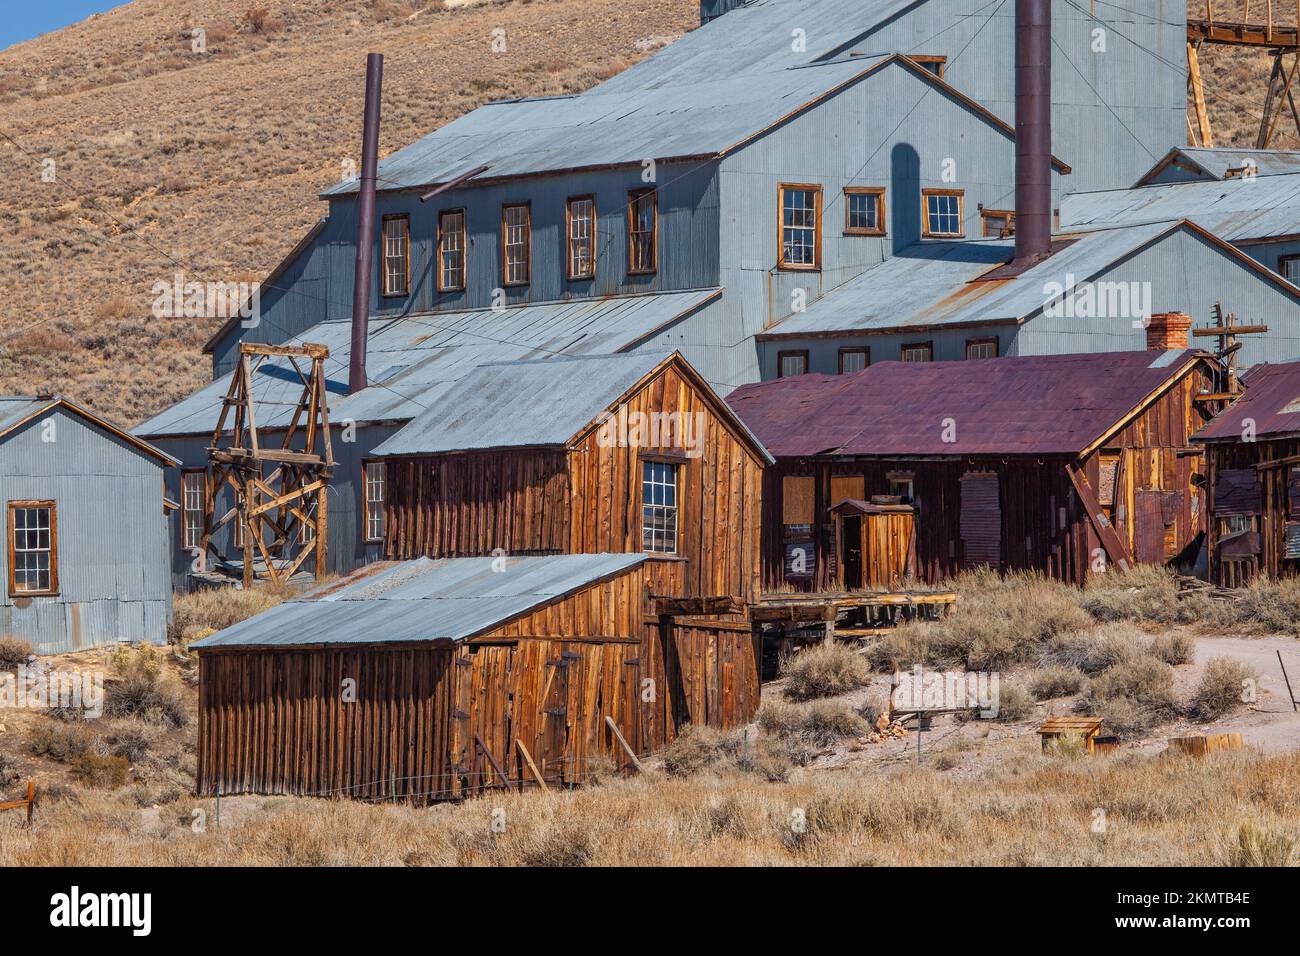 Standard Consolidated Mining Company Stamp Mill, bandoned mine buildings, Bodie State Historic Park, Bodie, California Stock Photo